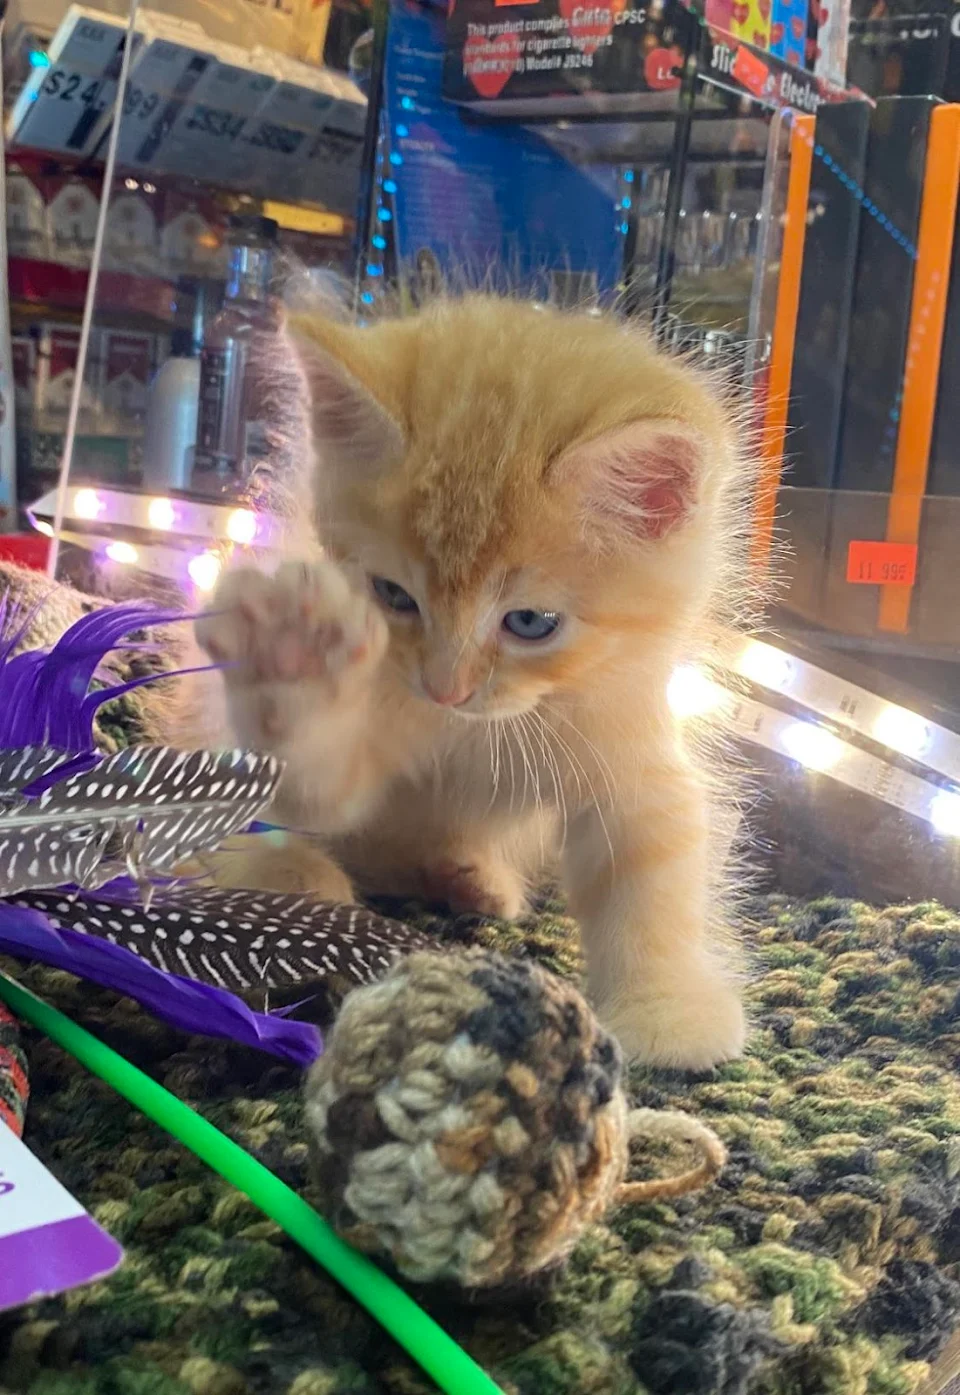 My local smoke shop had a kitten on display at the front counter today.